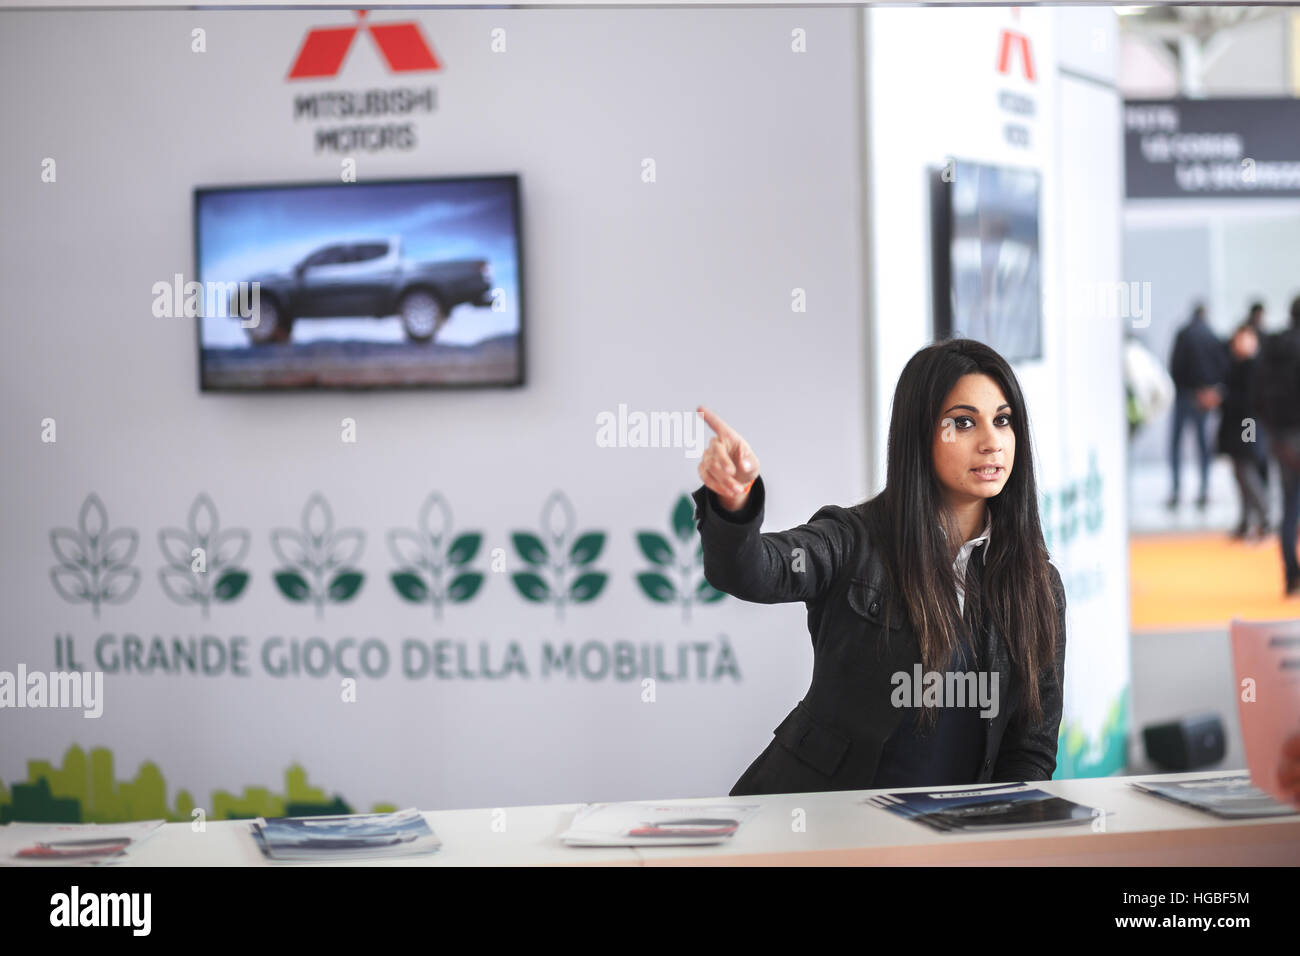 Italy, Bologna motor show 2016, Young receptionist from Mitsubishi exhibition booth giving indication Stock Photo